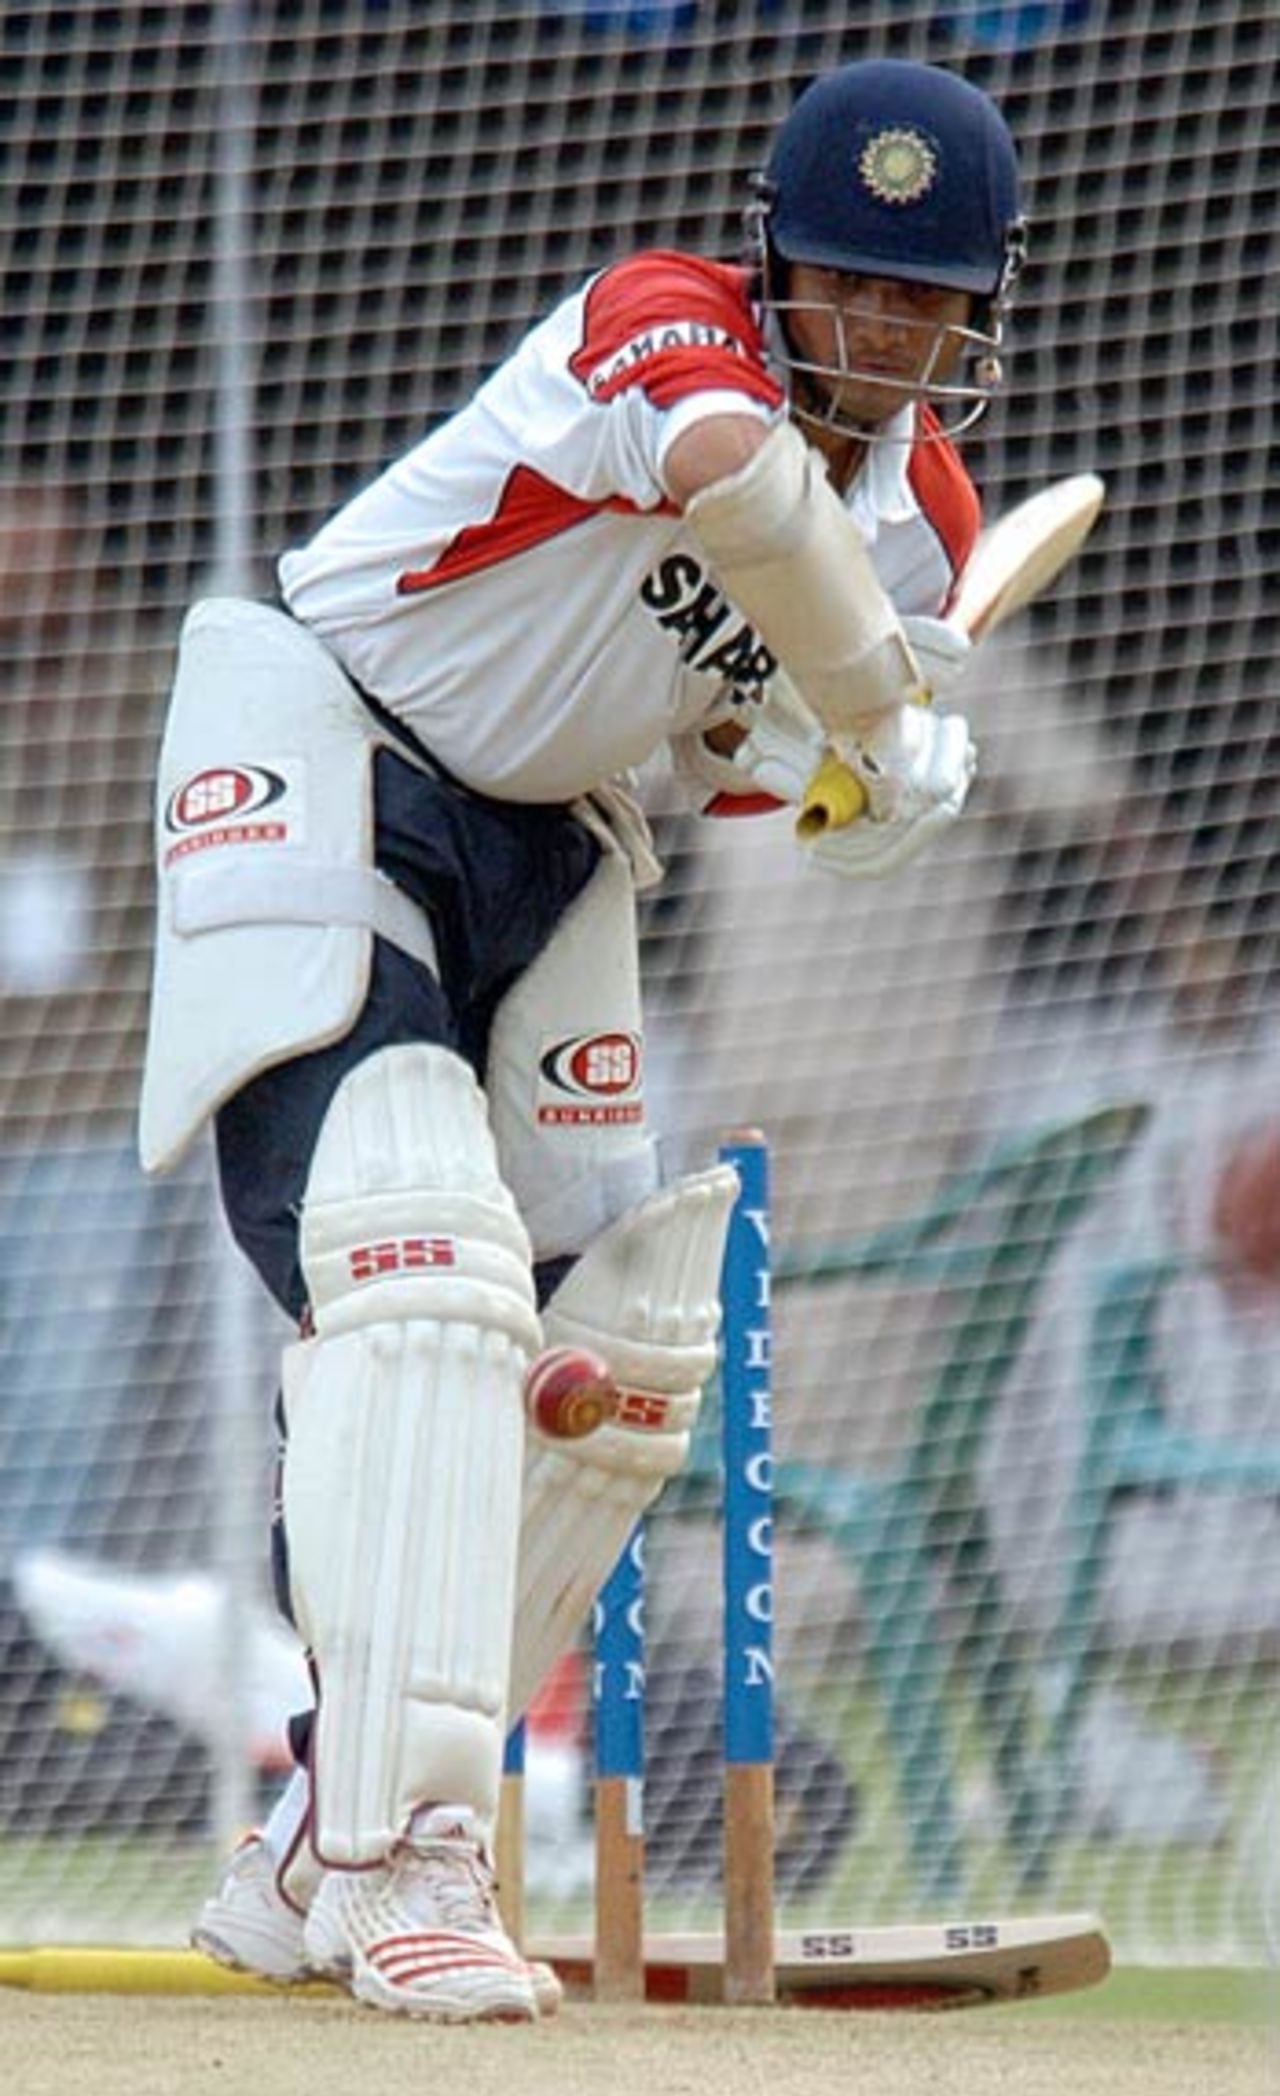 Sourav Ganguly bats in the nets during a practice session at the MA Chidambaram Stadium ahead of the first Test against Sri Lanka, Chennai, November 30, 2005